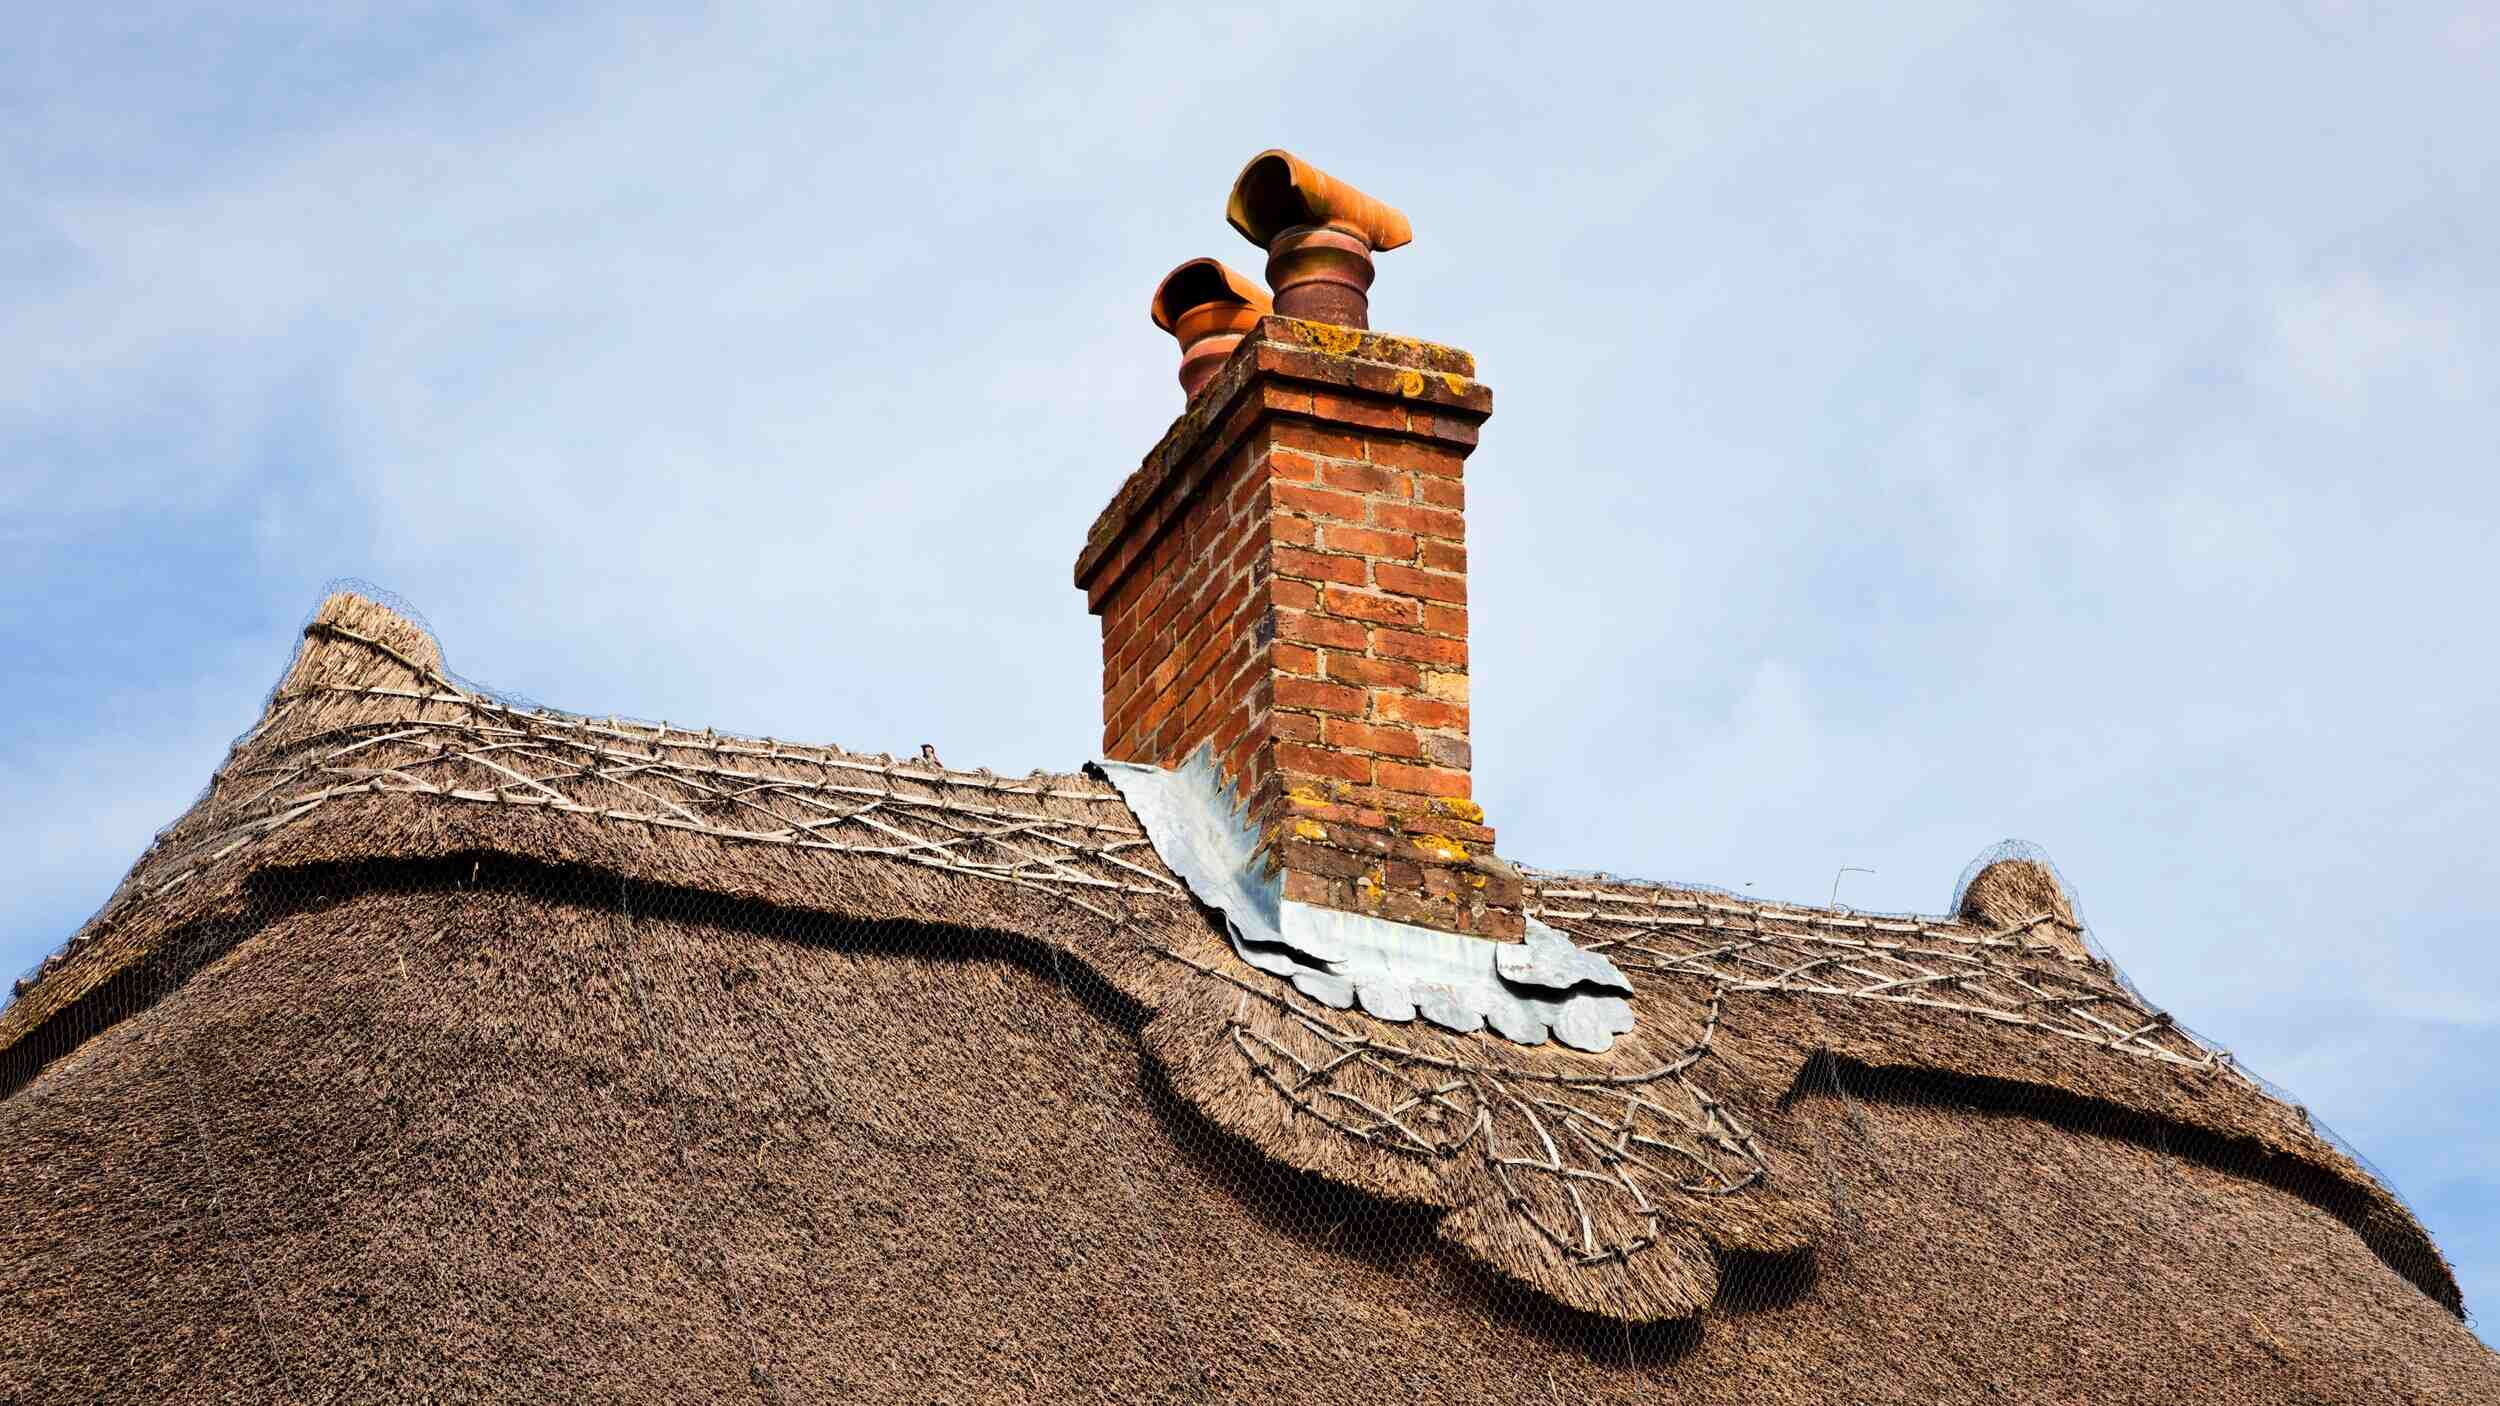 How To Install Chimney Thatched Roof